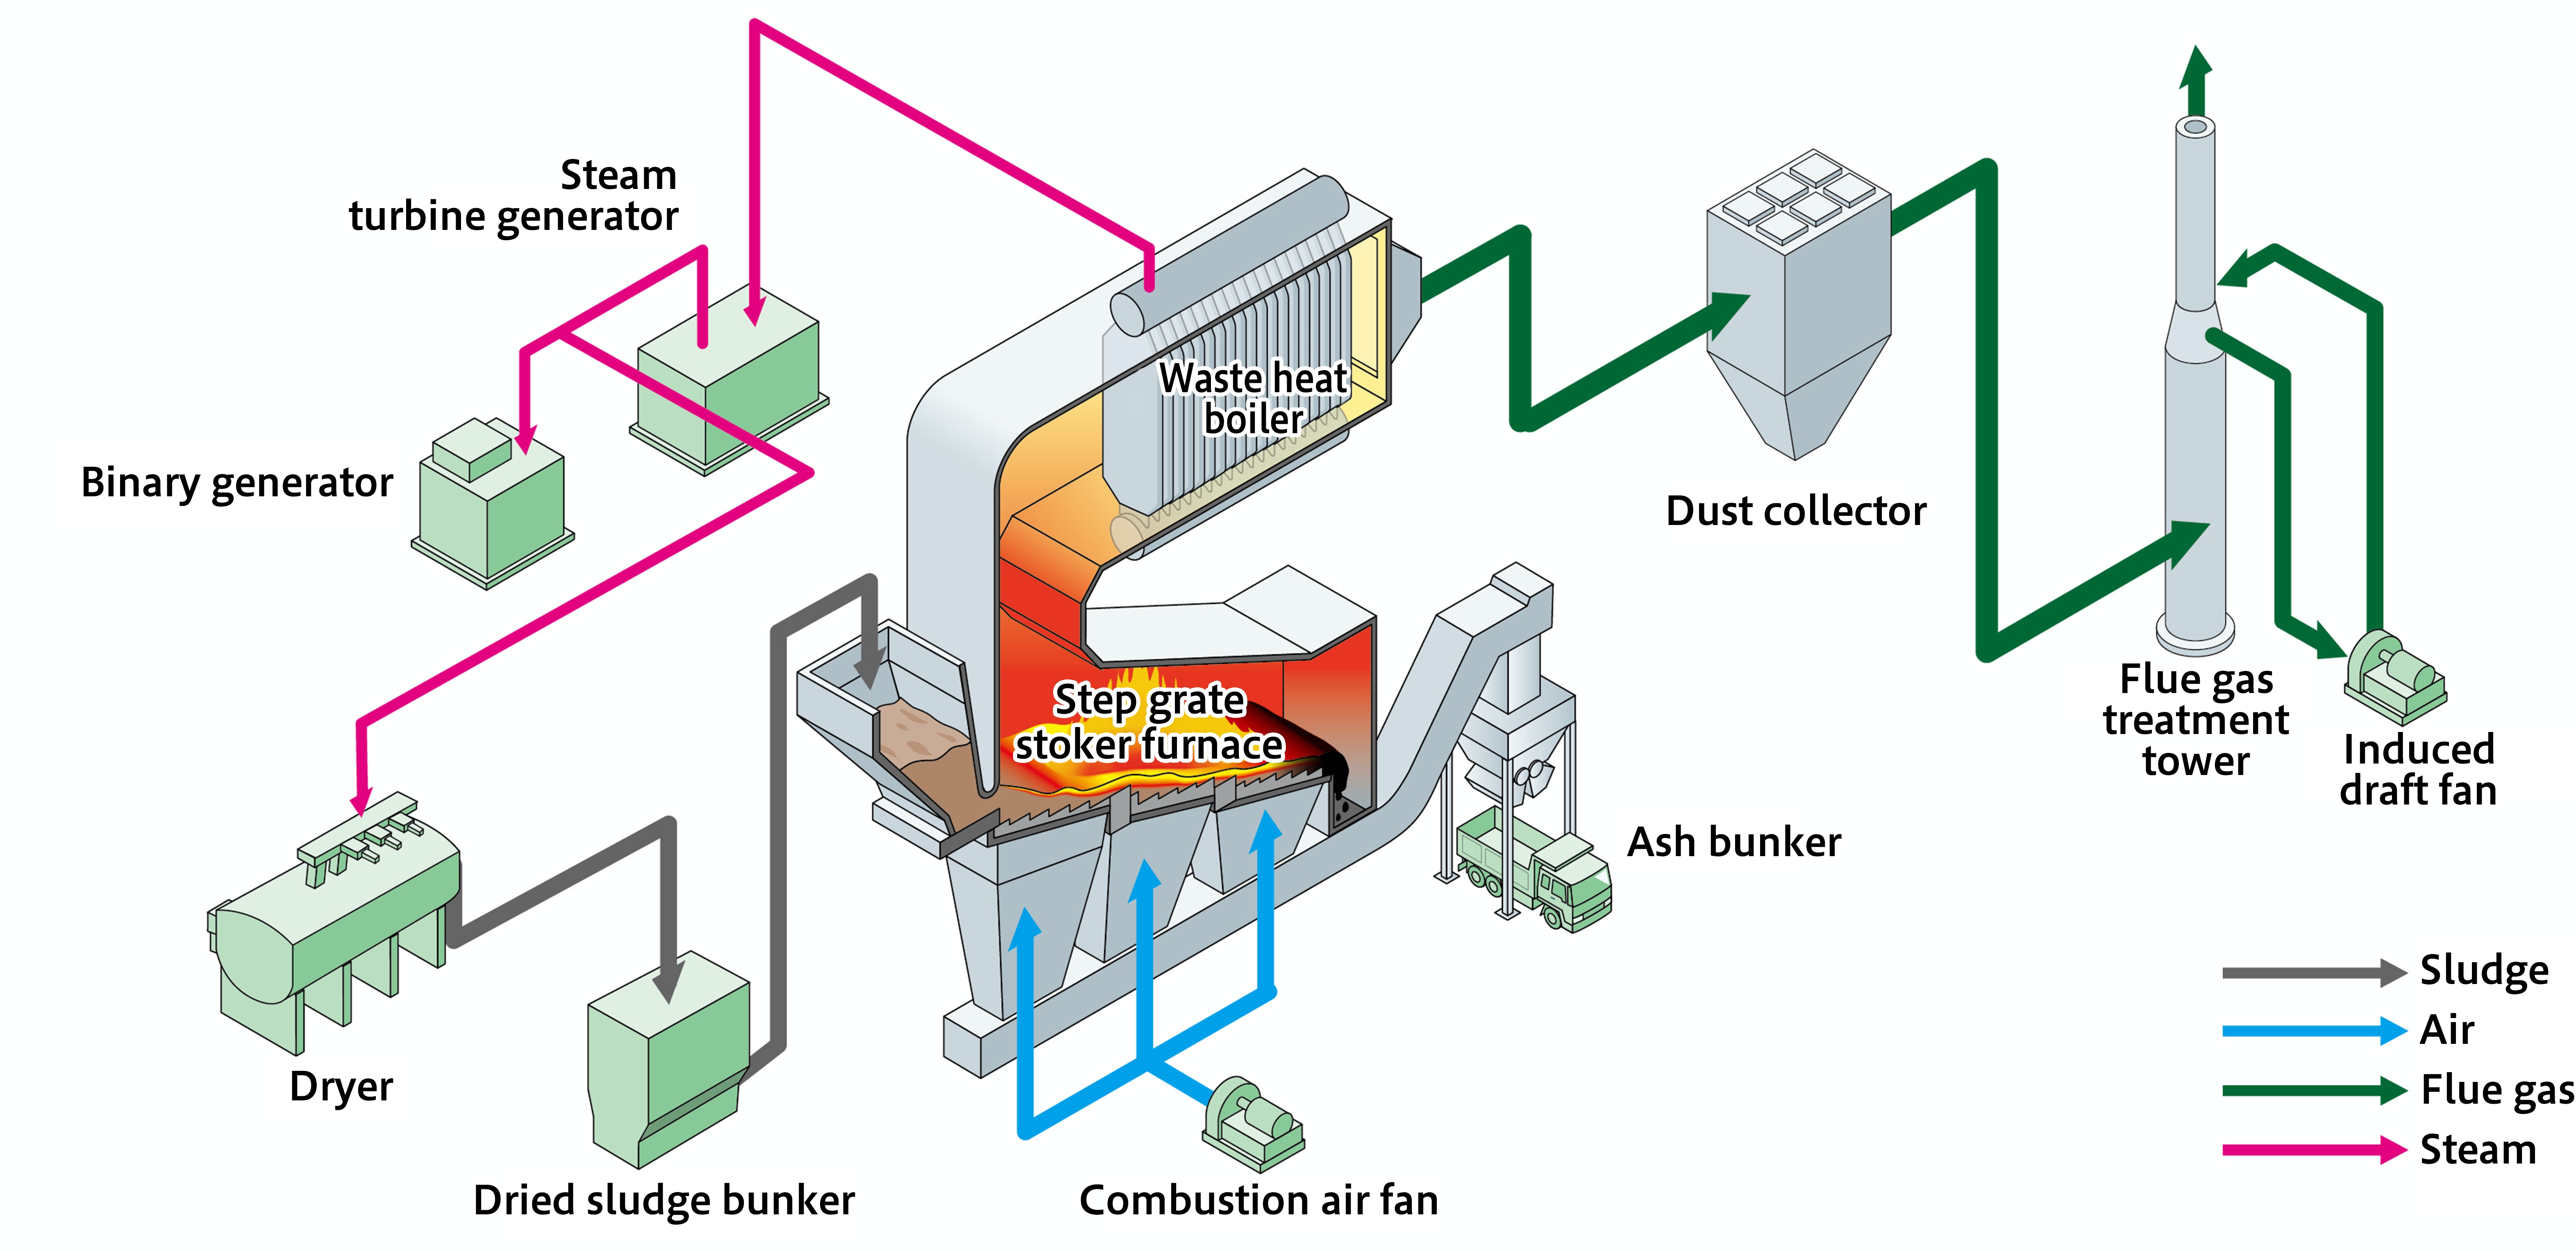 Type D: Conventional dehydrator (single-coagulant sludge conditioning) + dryer + step grate stoker furnace